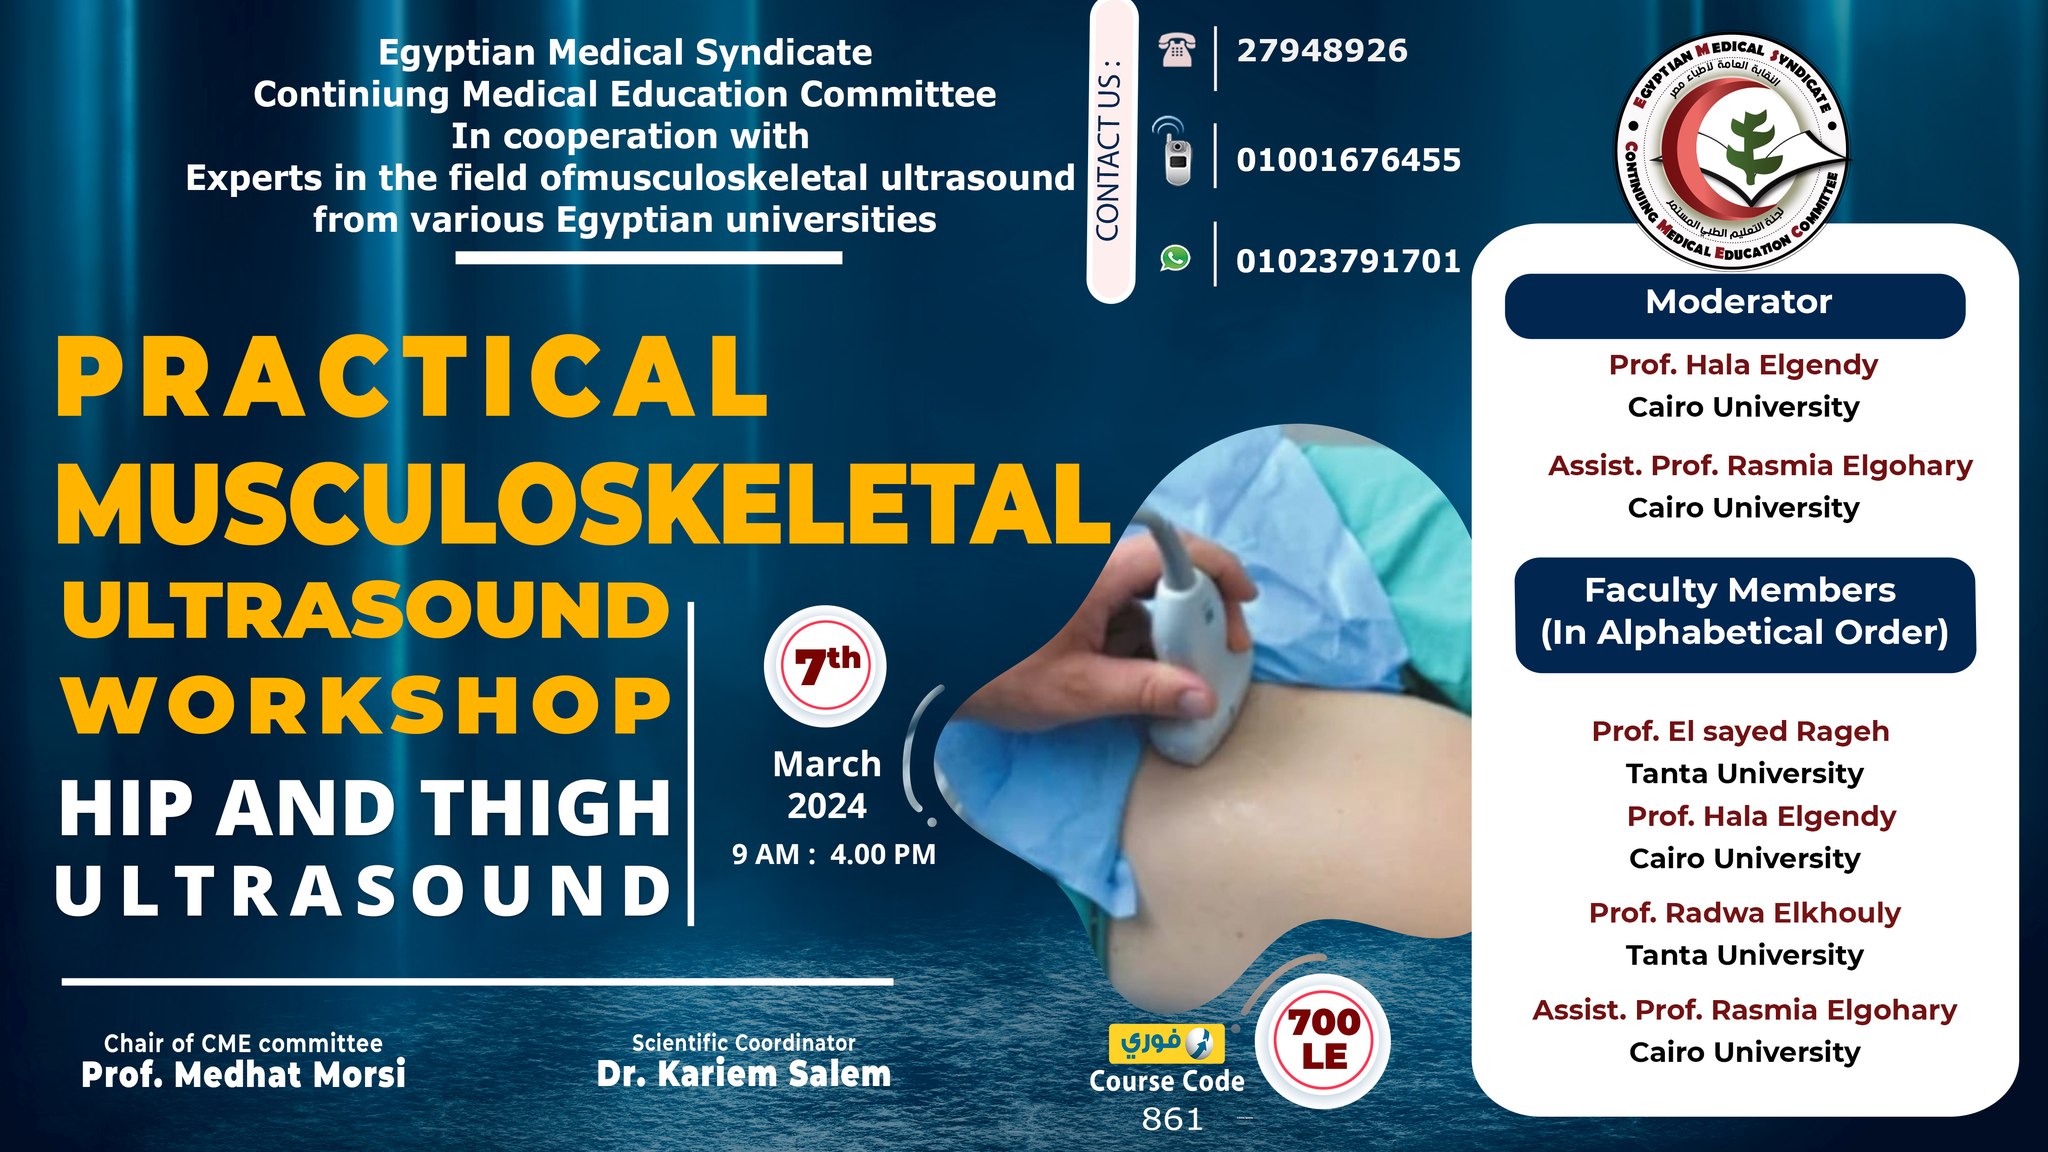 Practical Musculoskeletal ultrasound workshop (Hip and thigh ultrasound)